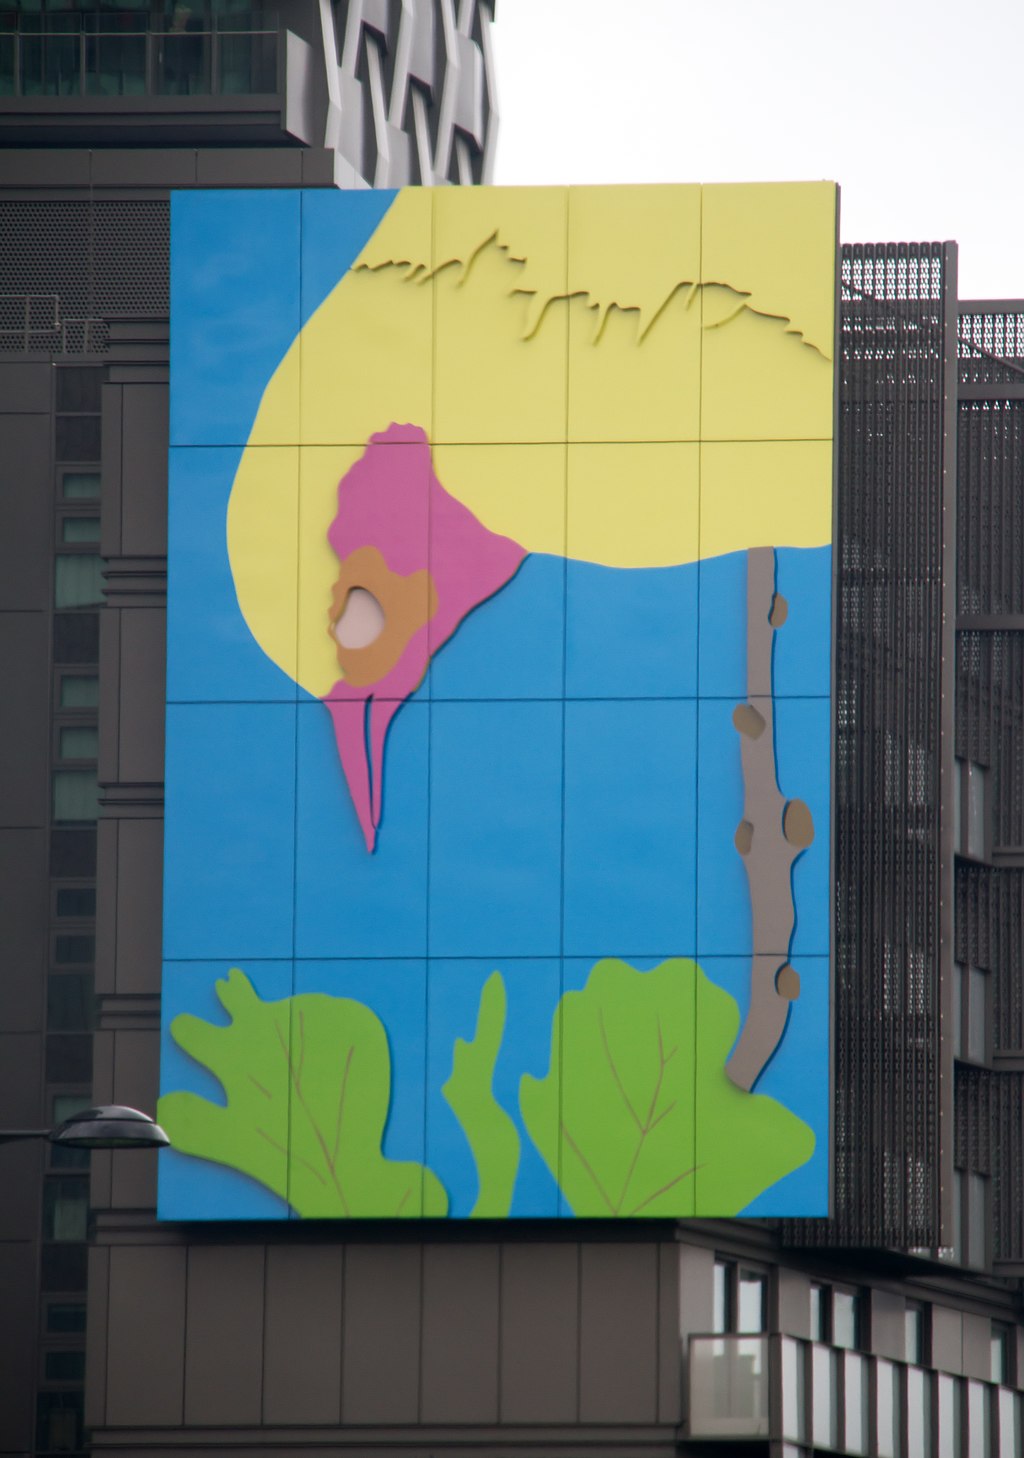 Gary Hume's Pecking Bird is an example of aluminum as a large-scale surface for oil paints.